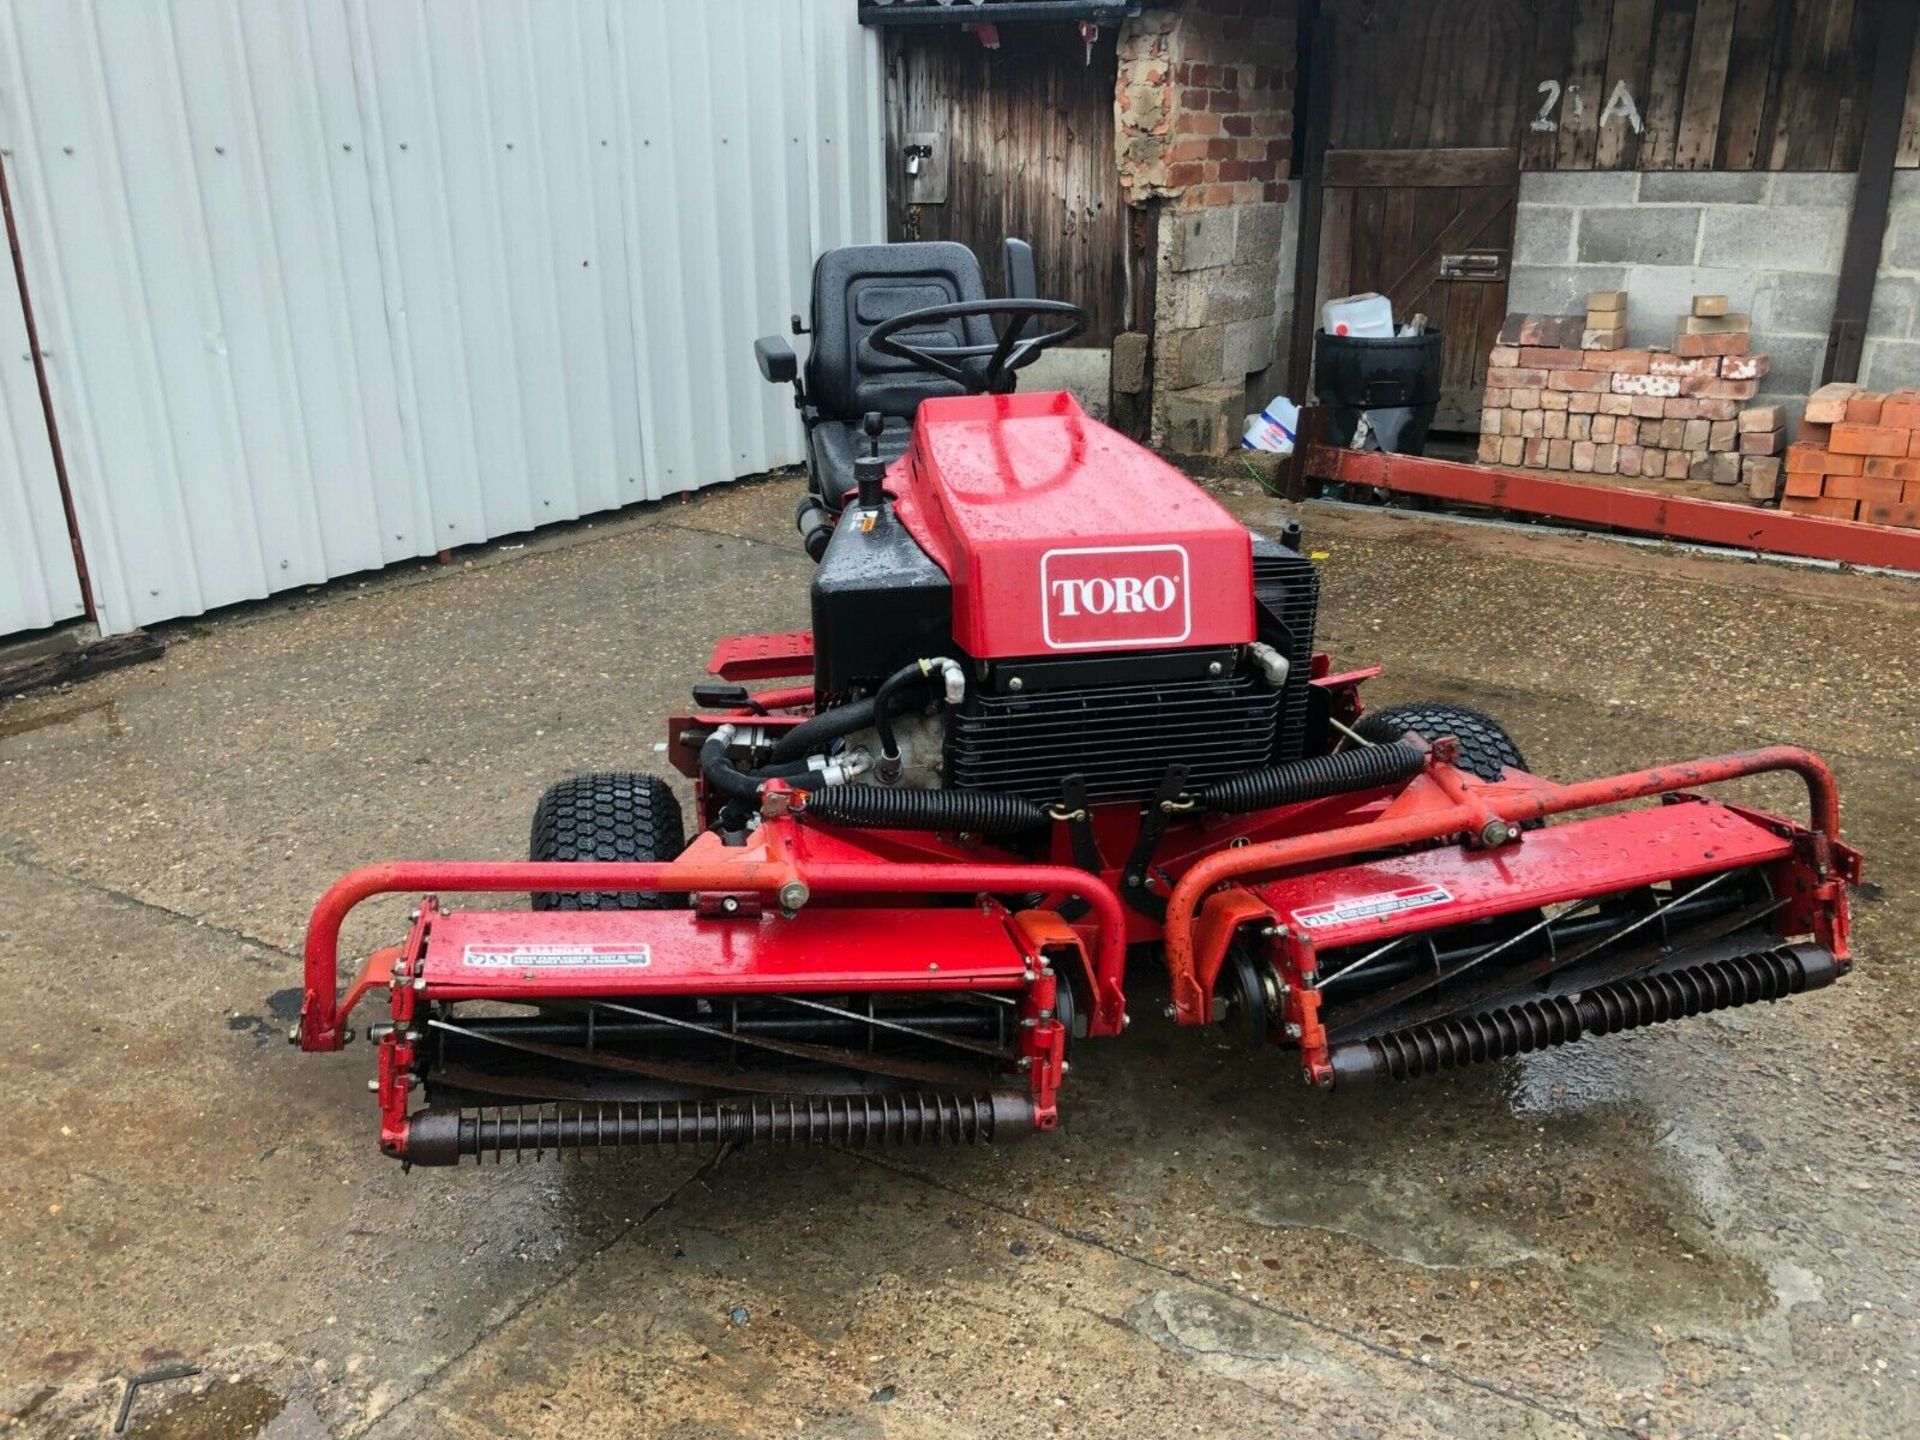 TORO 216 PETROL, TRIPLE RIDE ON MOWER, GENUINE 687 HOURS, 1 OWNER FROM NEW *NO VAT* - Image 2 of 5